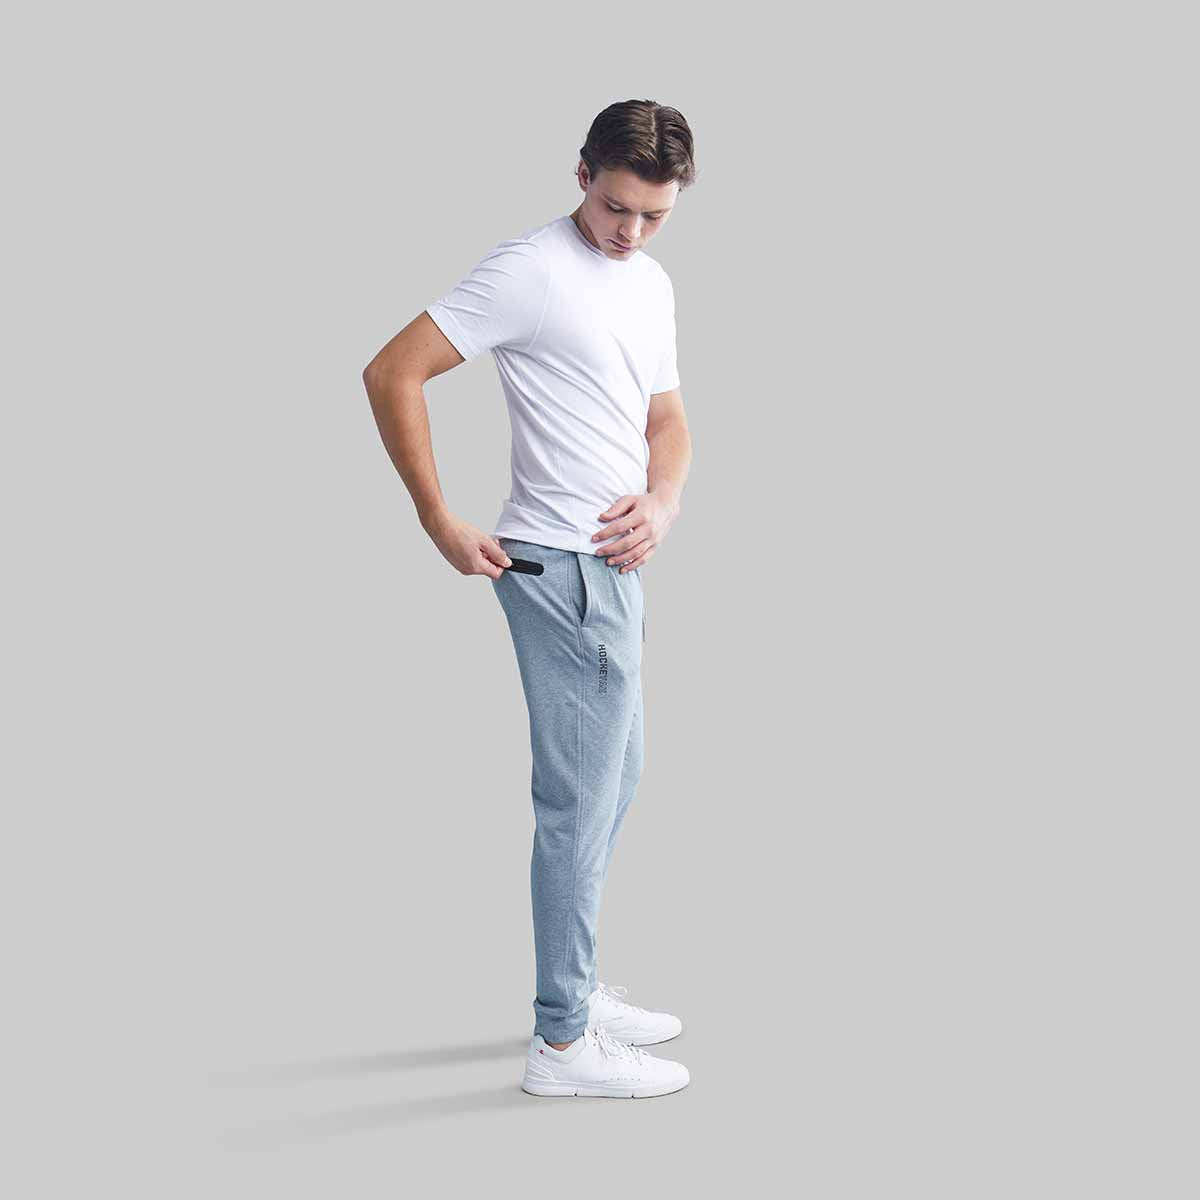 Zyia Athletic Joggers Gray Size L - $13 (85% Off Retail) - From Kaylah